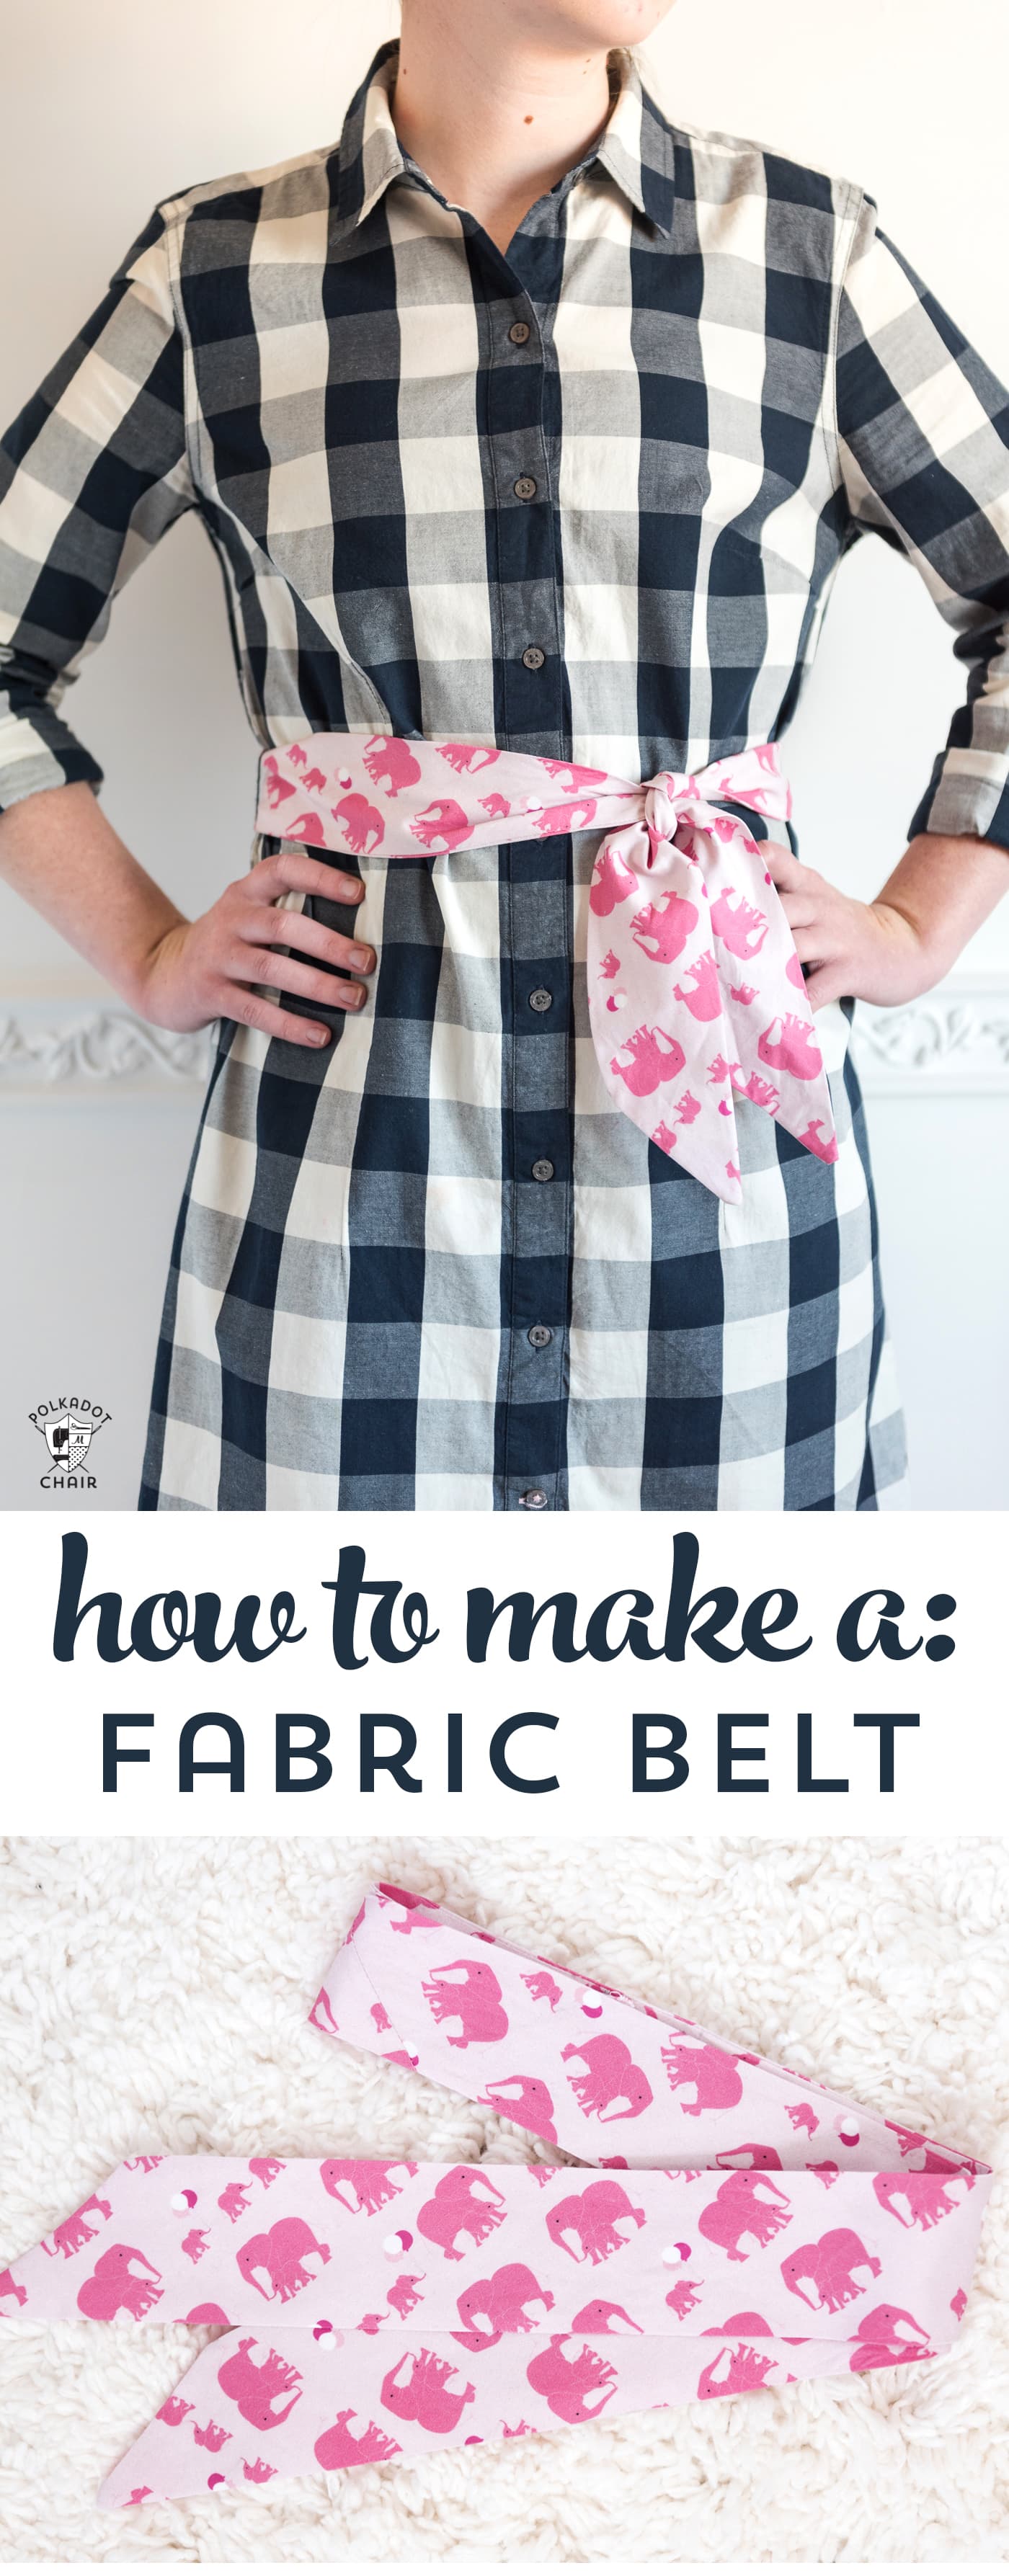 Learn how to make a fabric belt or sash with this free sewing tutorial. Can be made in multiple sizes. #FabricBeltTutorial #fabricbelt #sewingtutorial